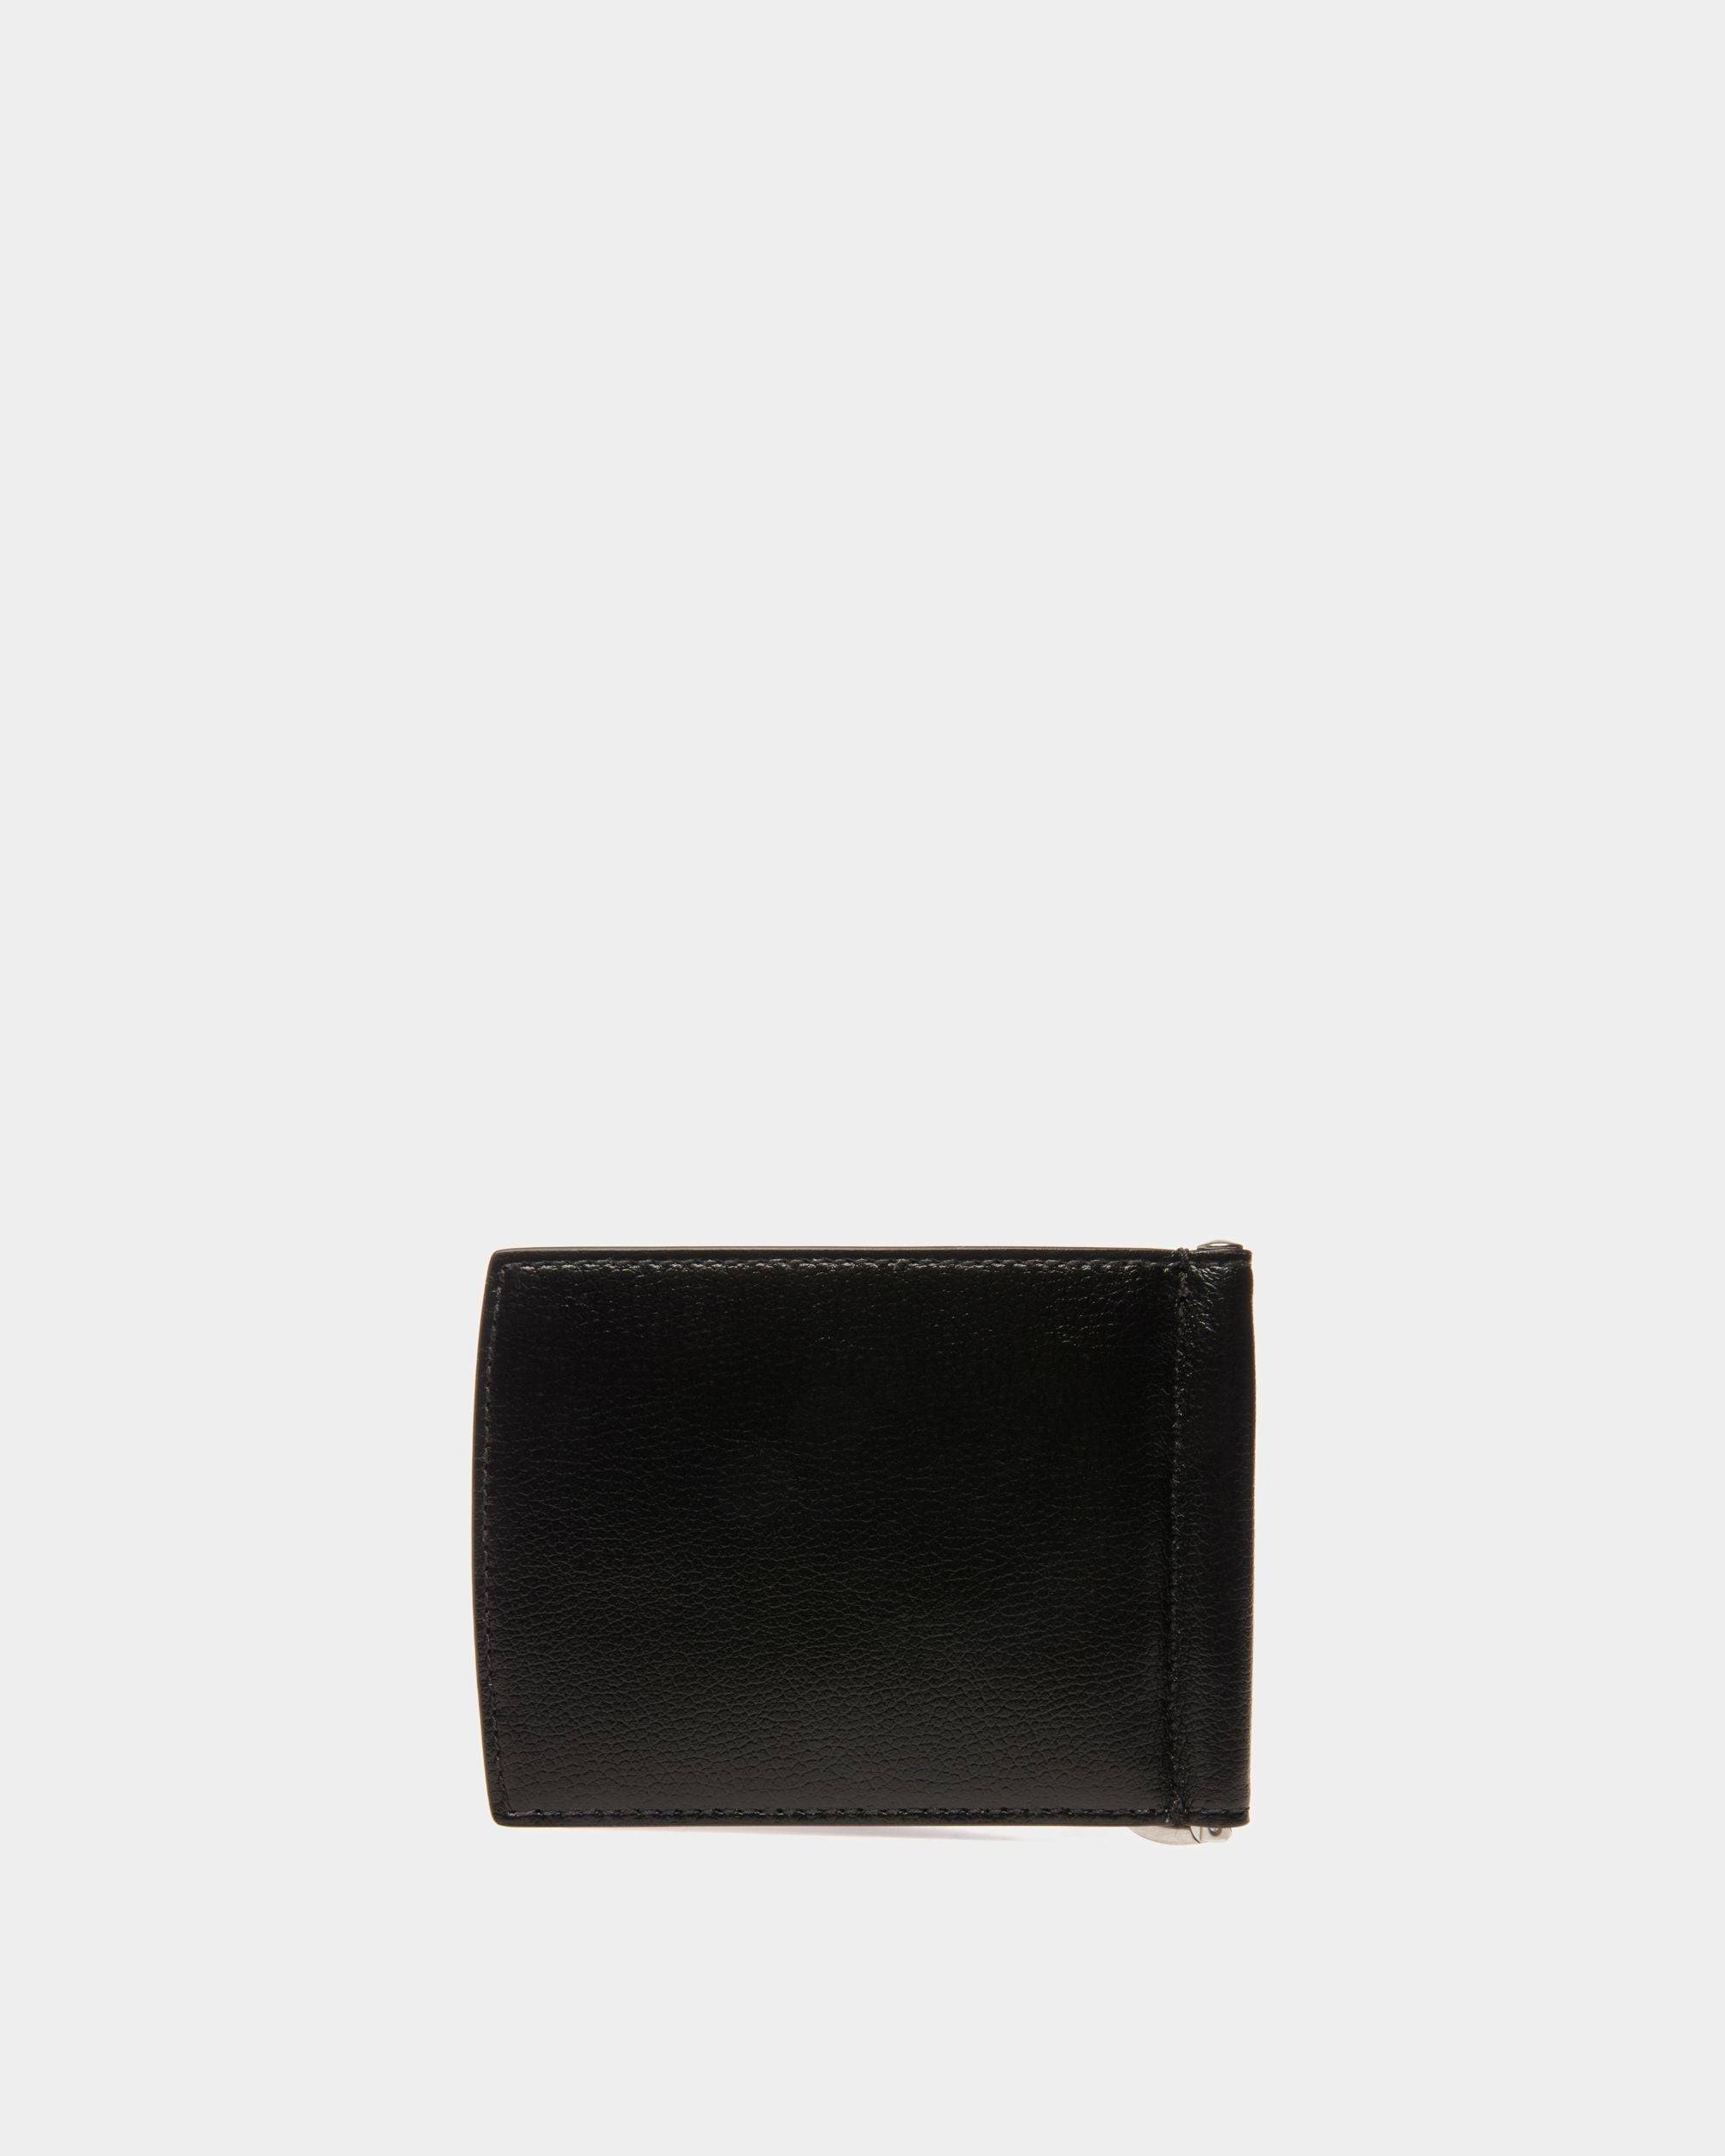 Banque Bi-fold Clip | Men's Wallets And Coin Purses | Black Leather | Bally | Still Life Back